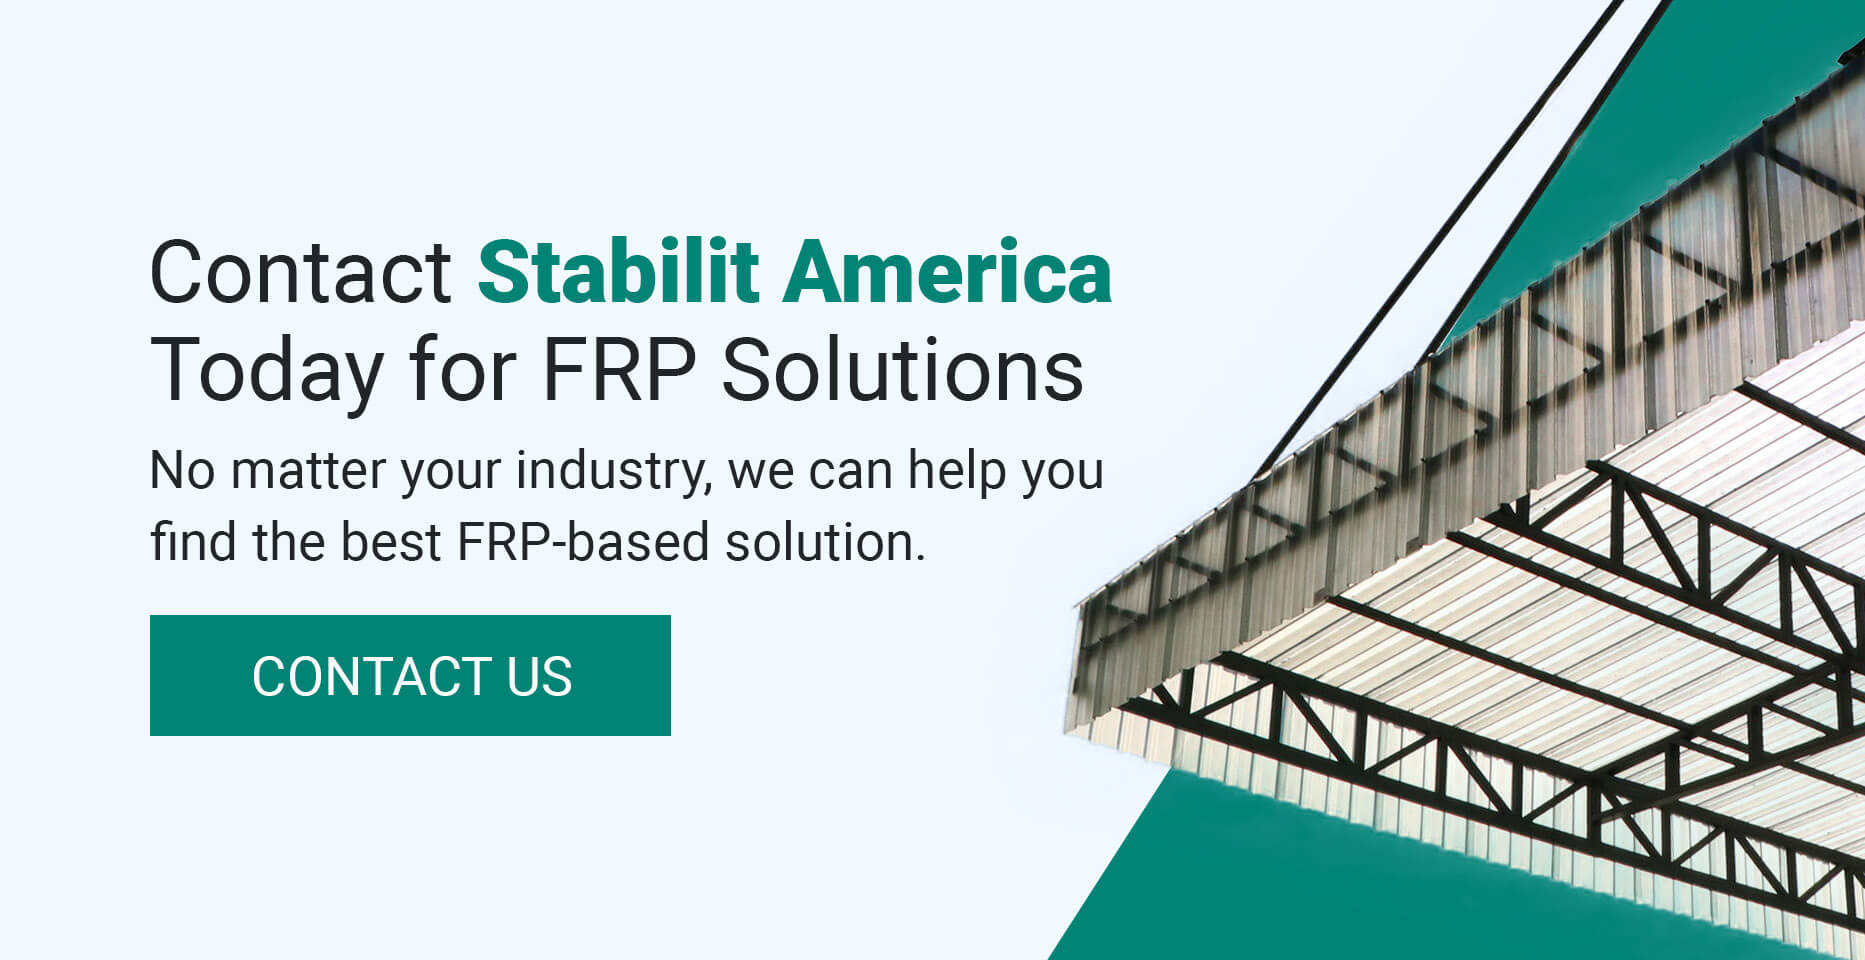 Contact Stabilit for FRP solutions